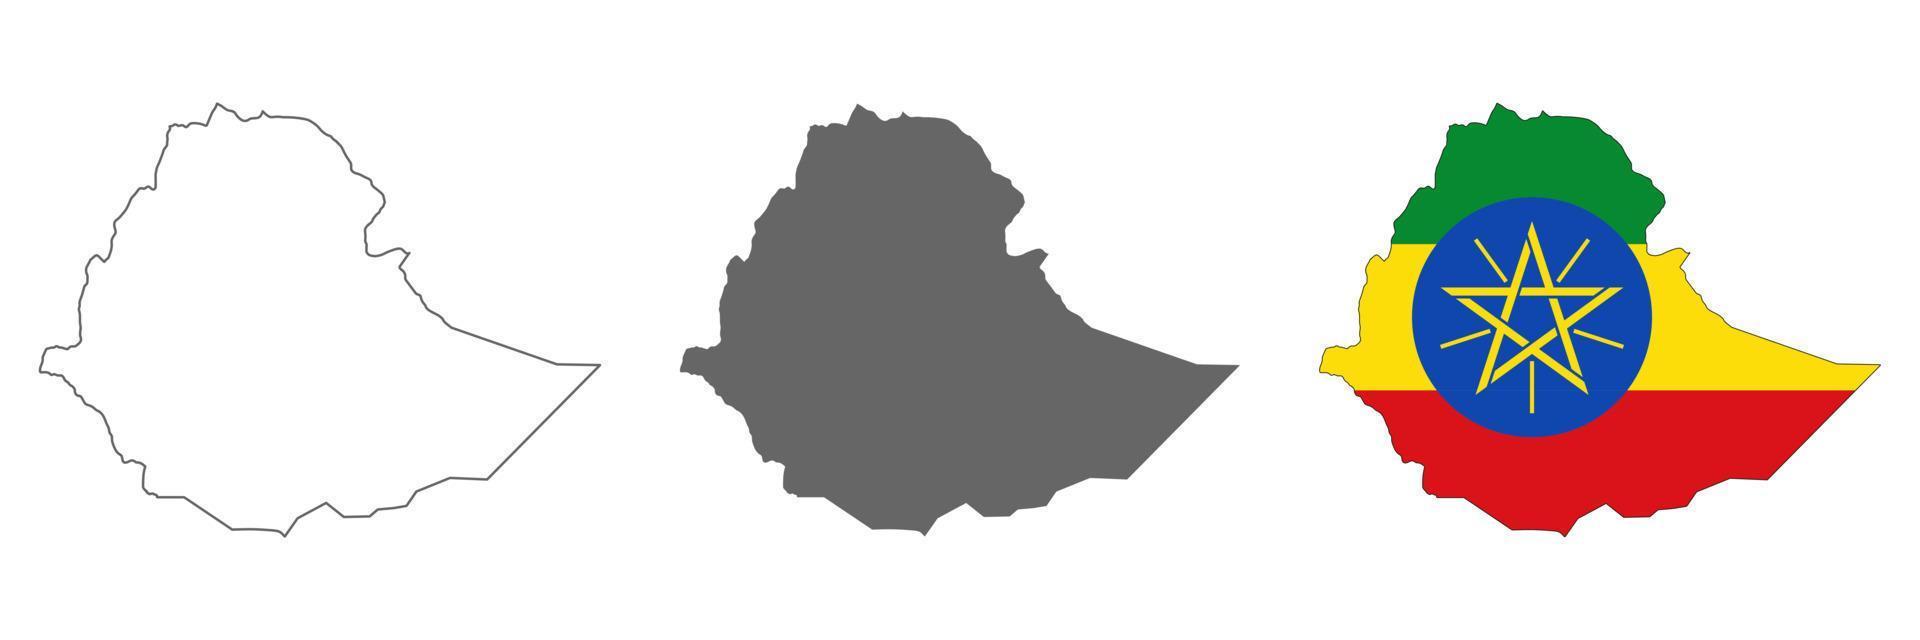 Highly detailed Ethiopia with borders isolated on background vector